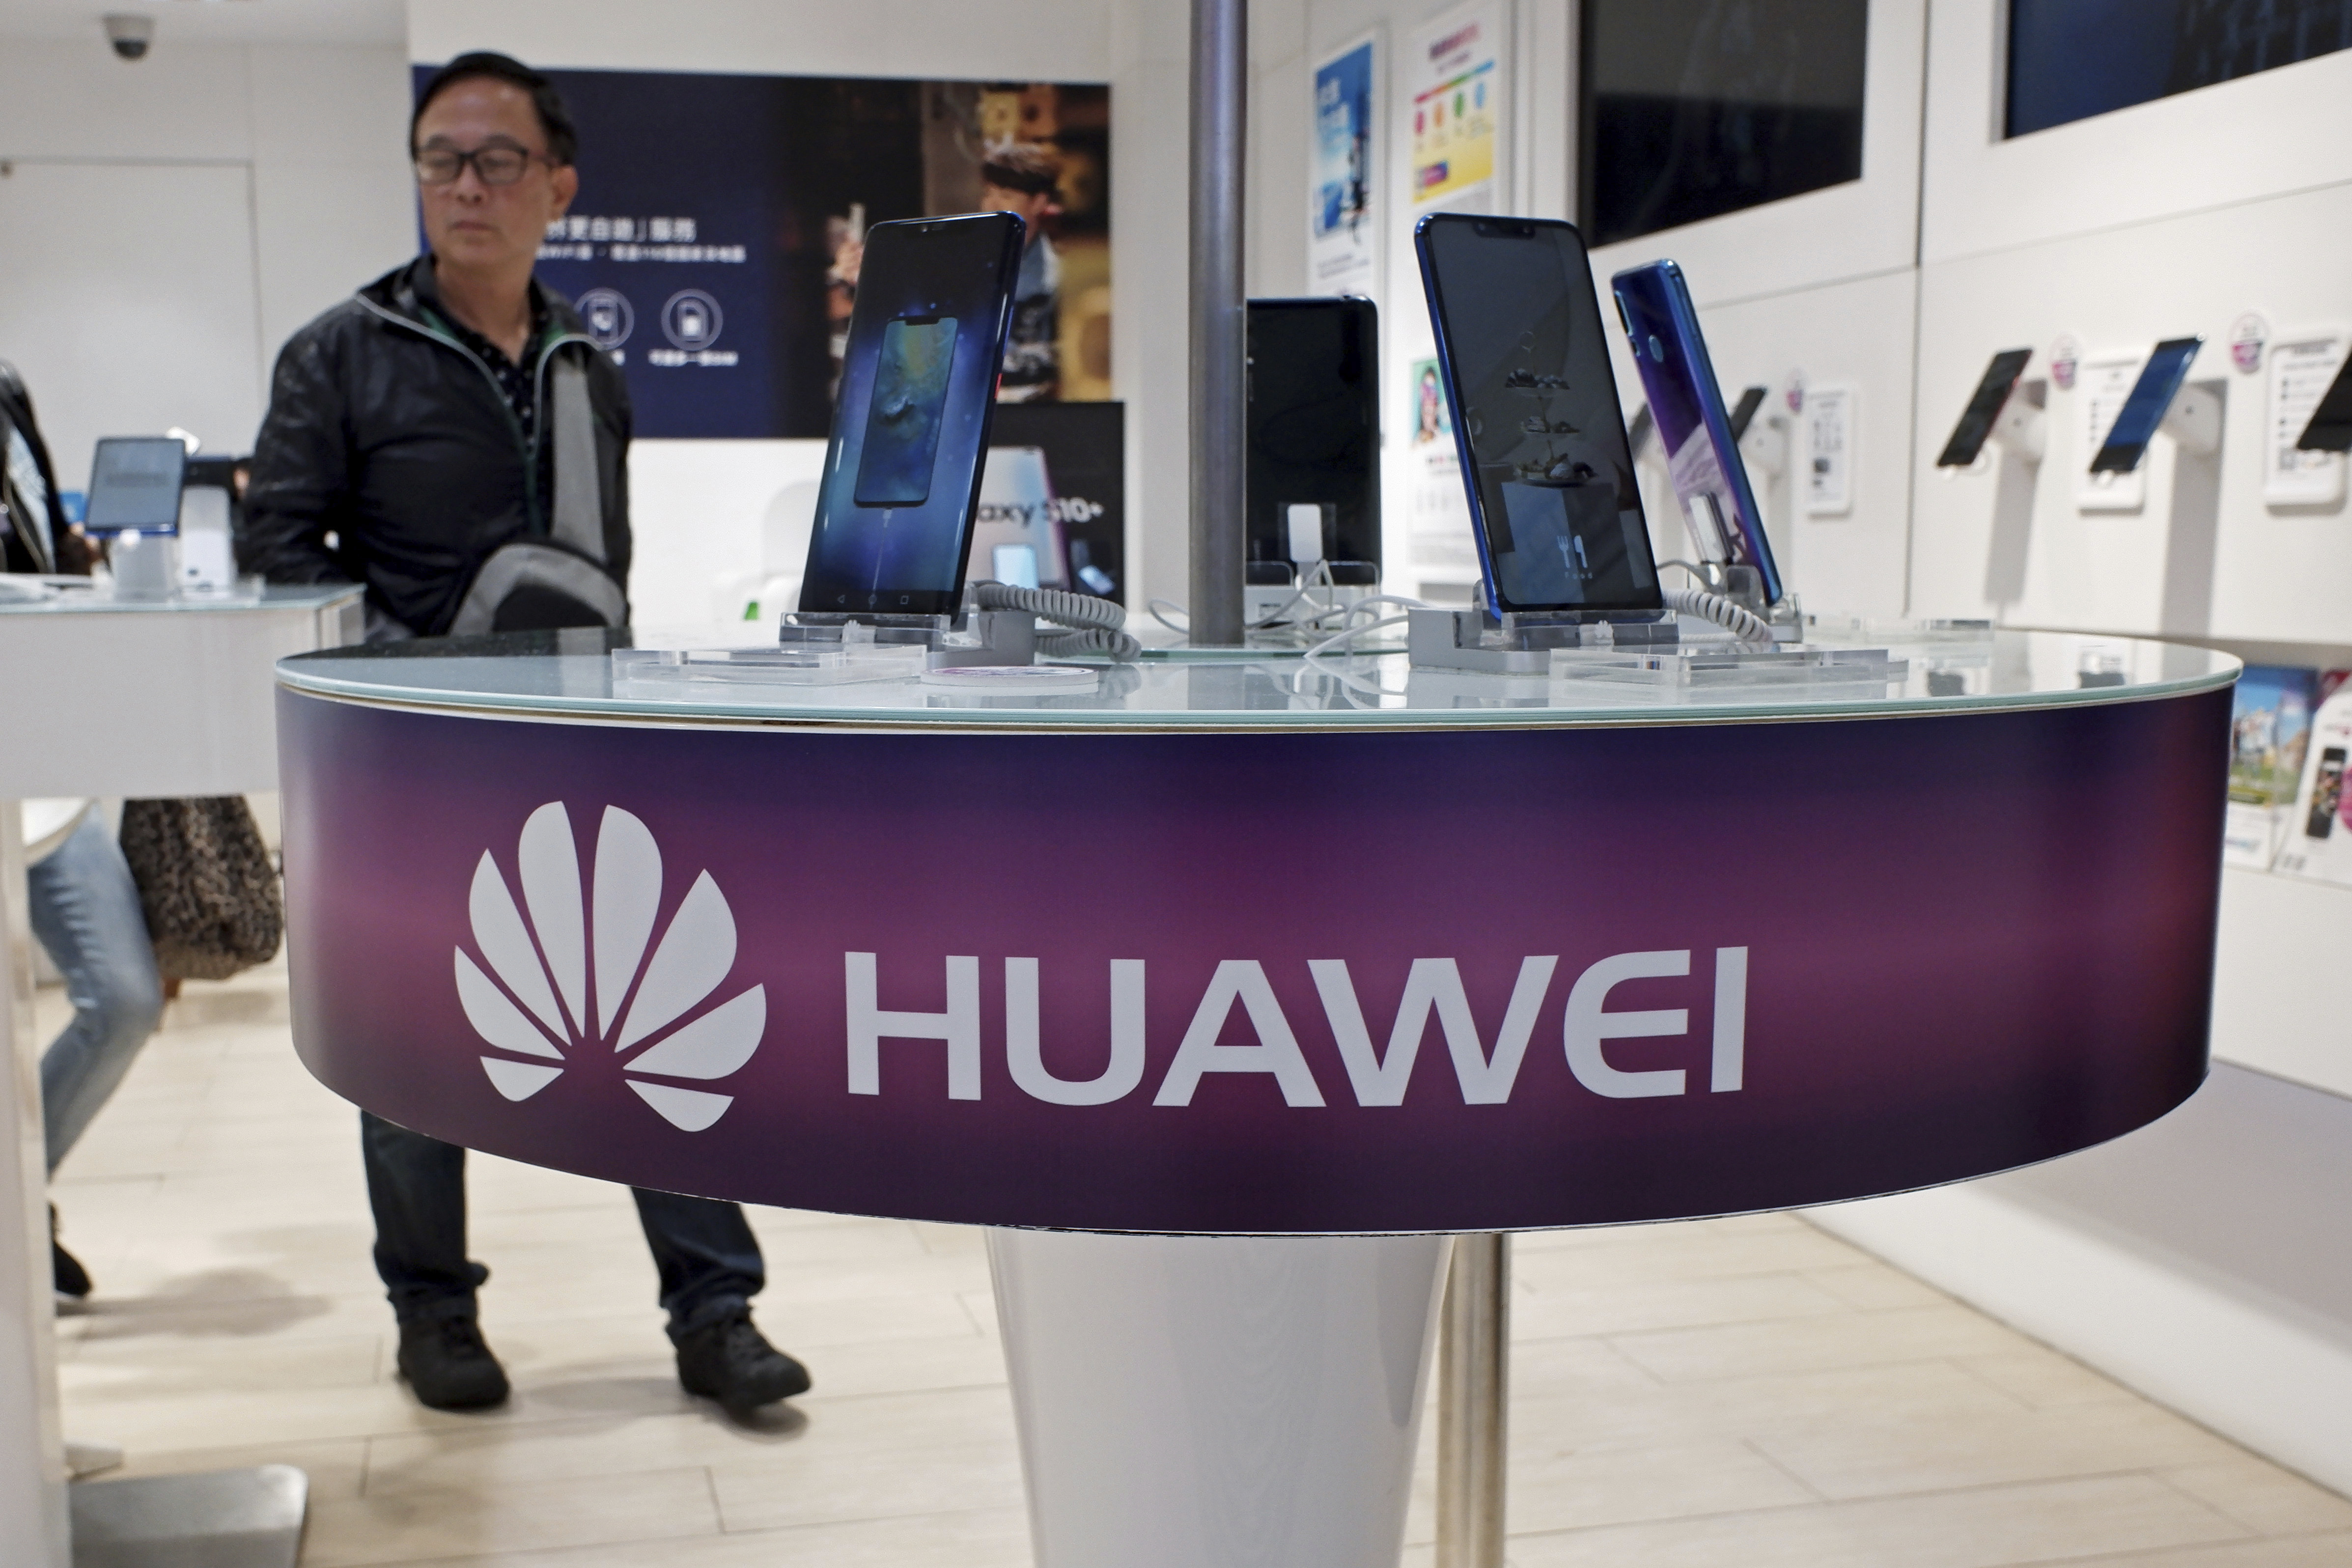 jammeraportable - China’s Huawei Says 1Q Sales Up 39%